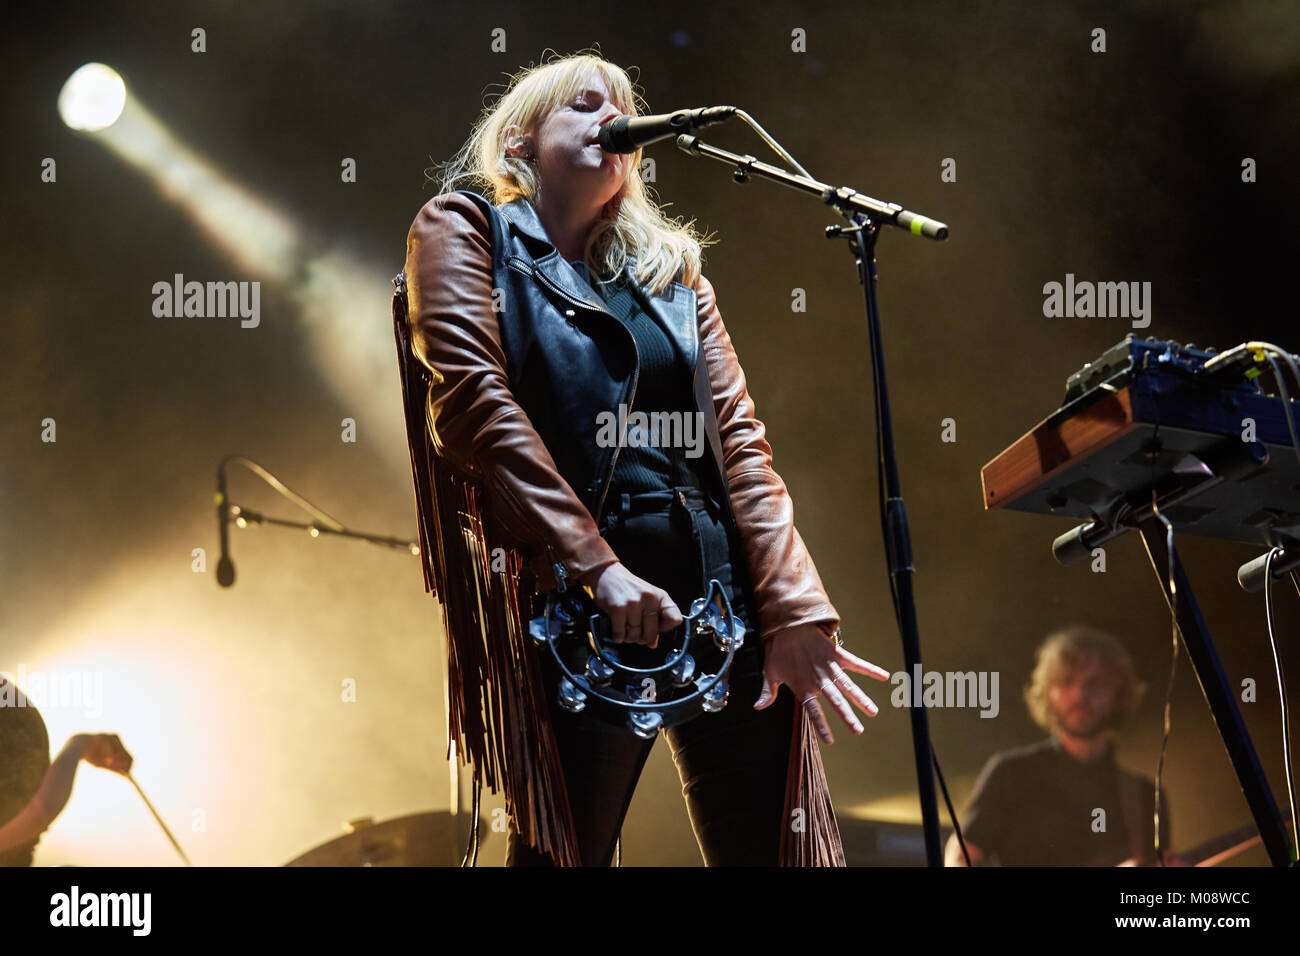 The Norwegian singer, songwriter and musician Susanne Sundfør performs a live concert at the Norwegian music festival Øyafestivalen 2015 in Oslo. Norway, 15/08 2015. Stock Photo